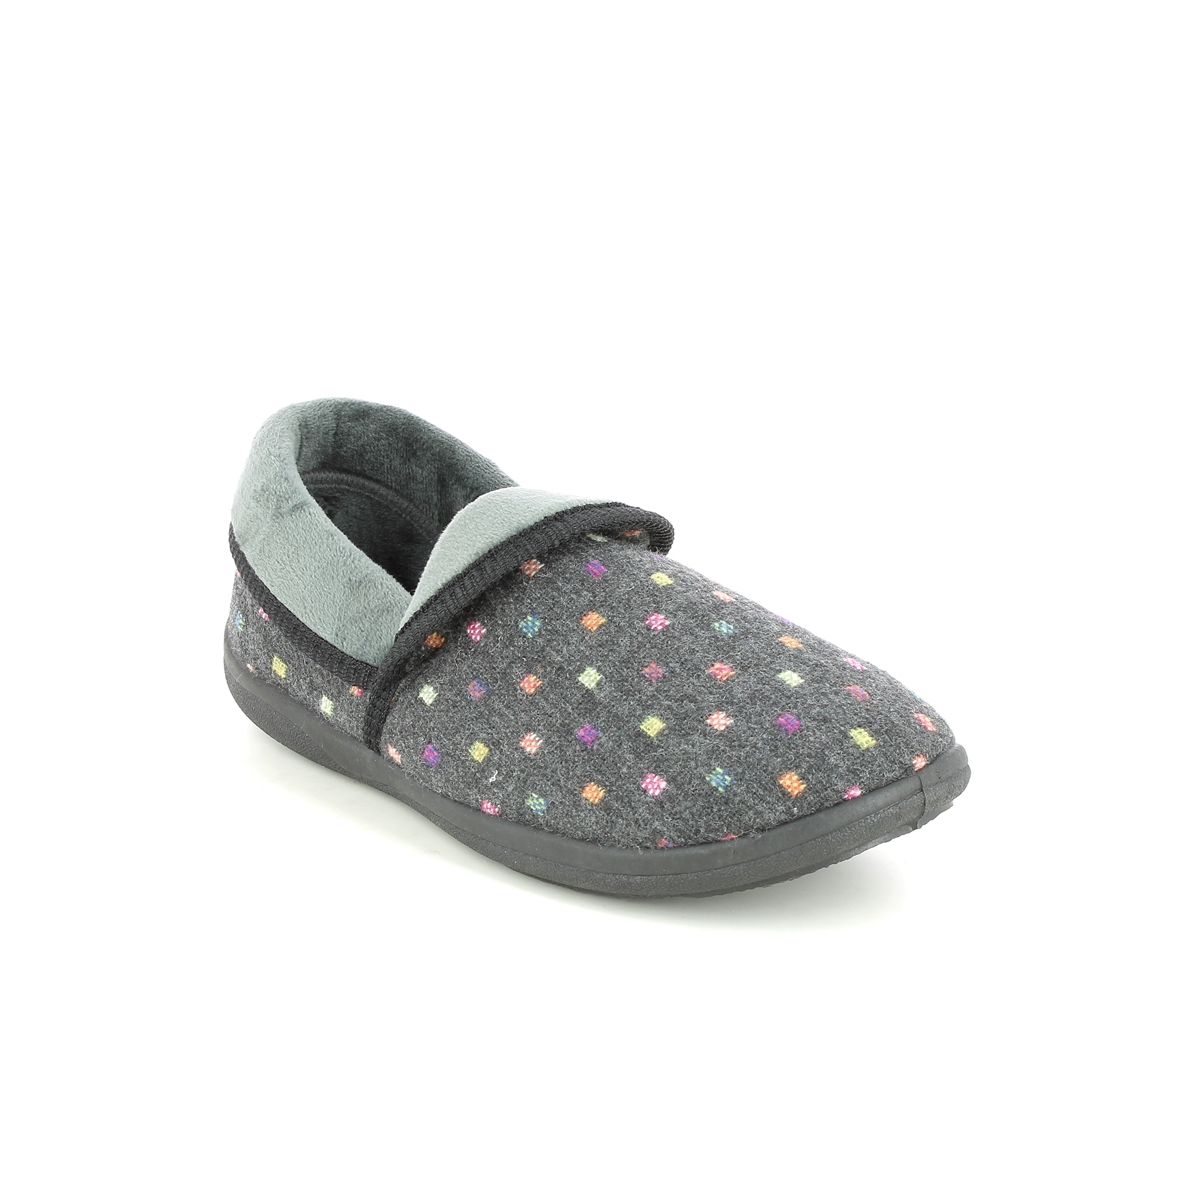 Padders Mellow Ee Fit Grey Womens slippers 460-1576 in a Plain Textile in Size 4